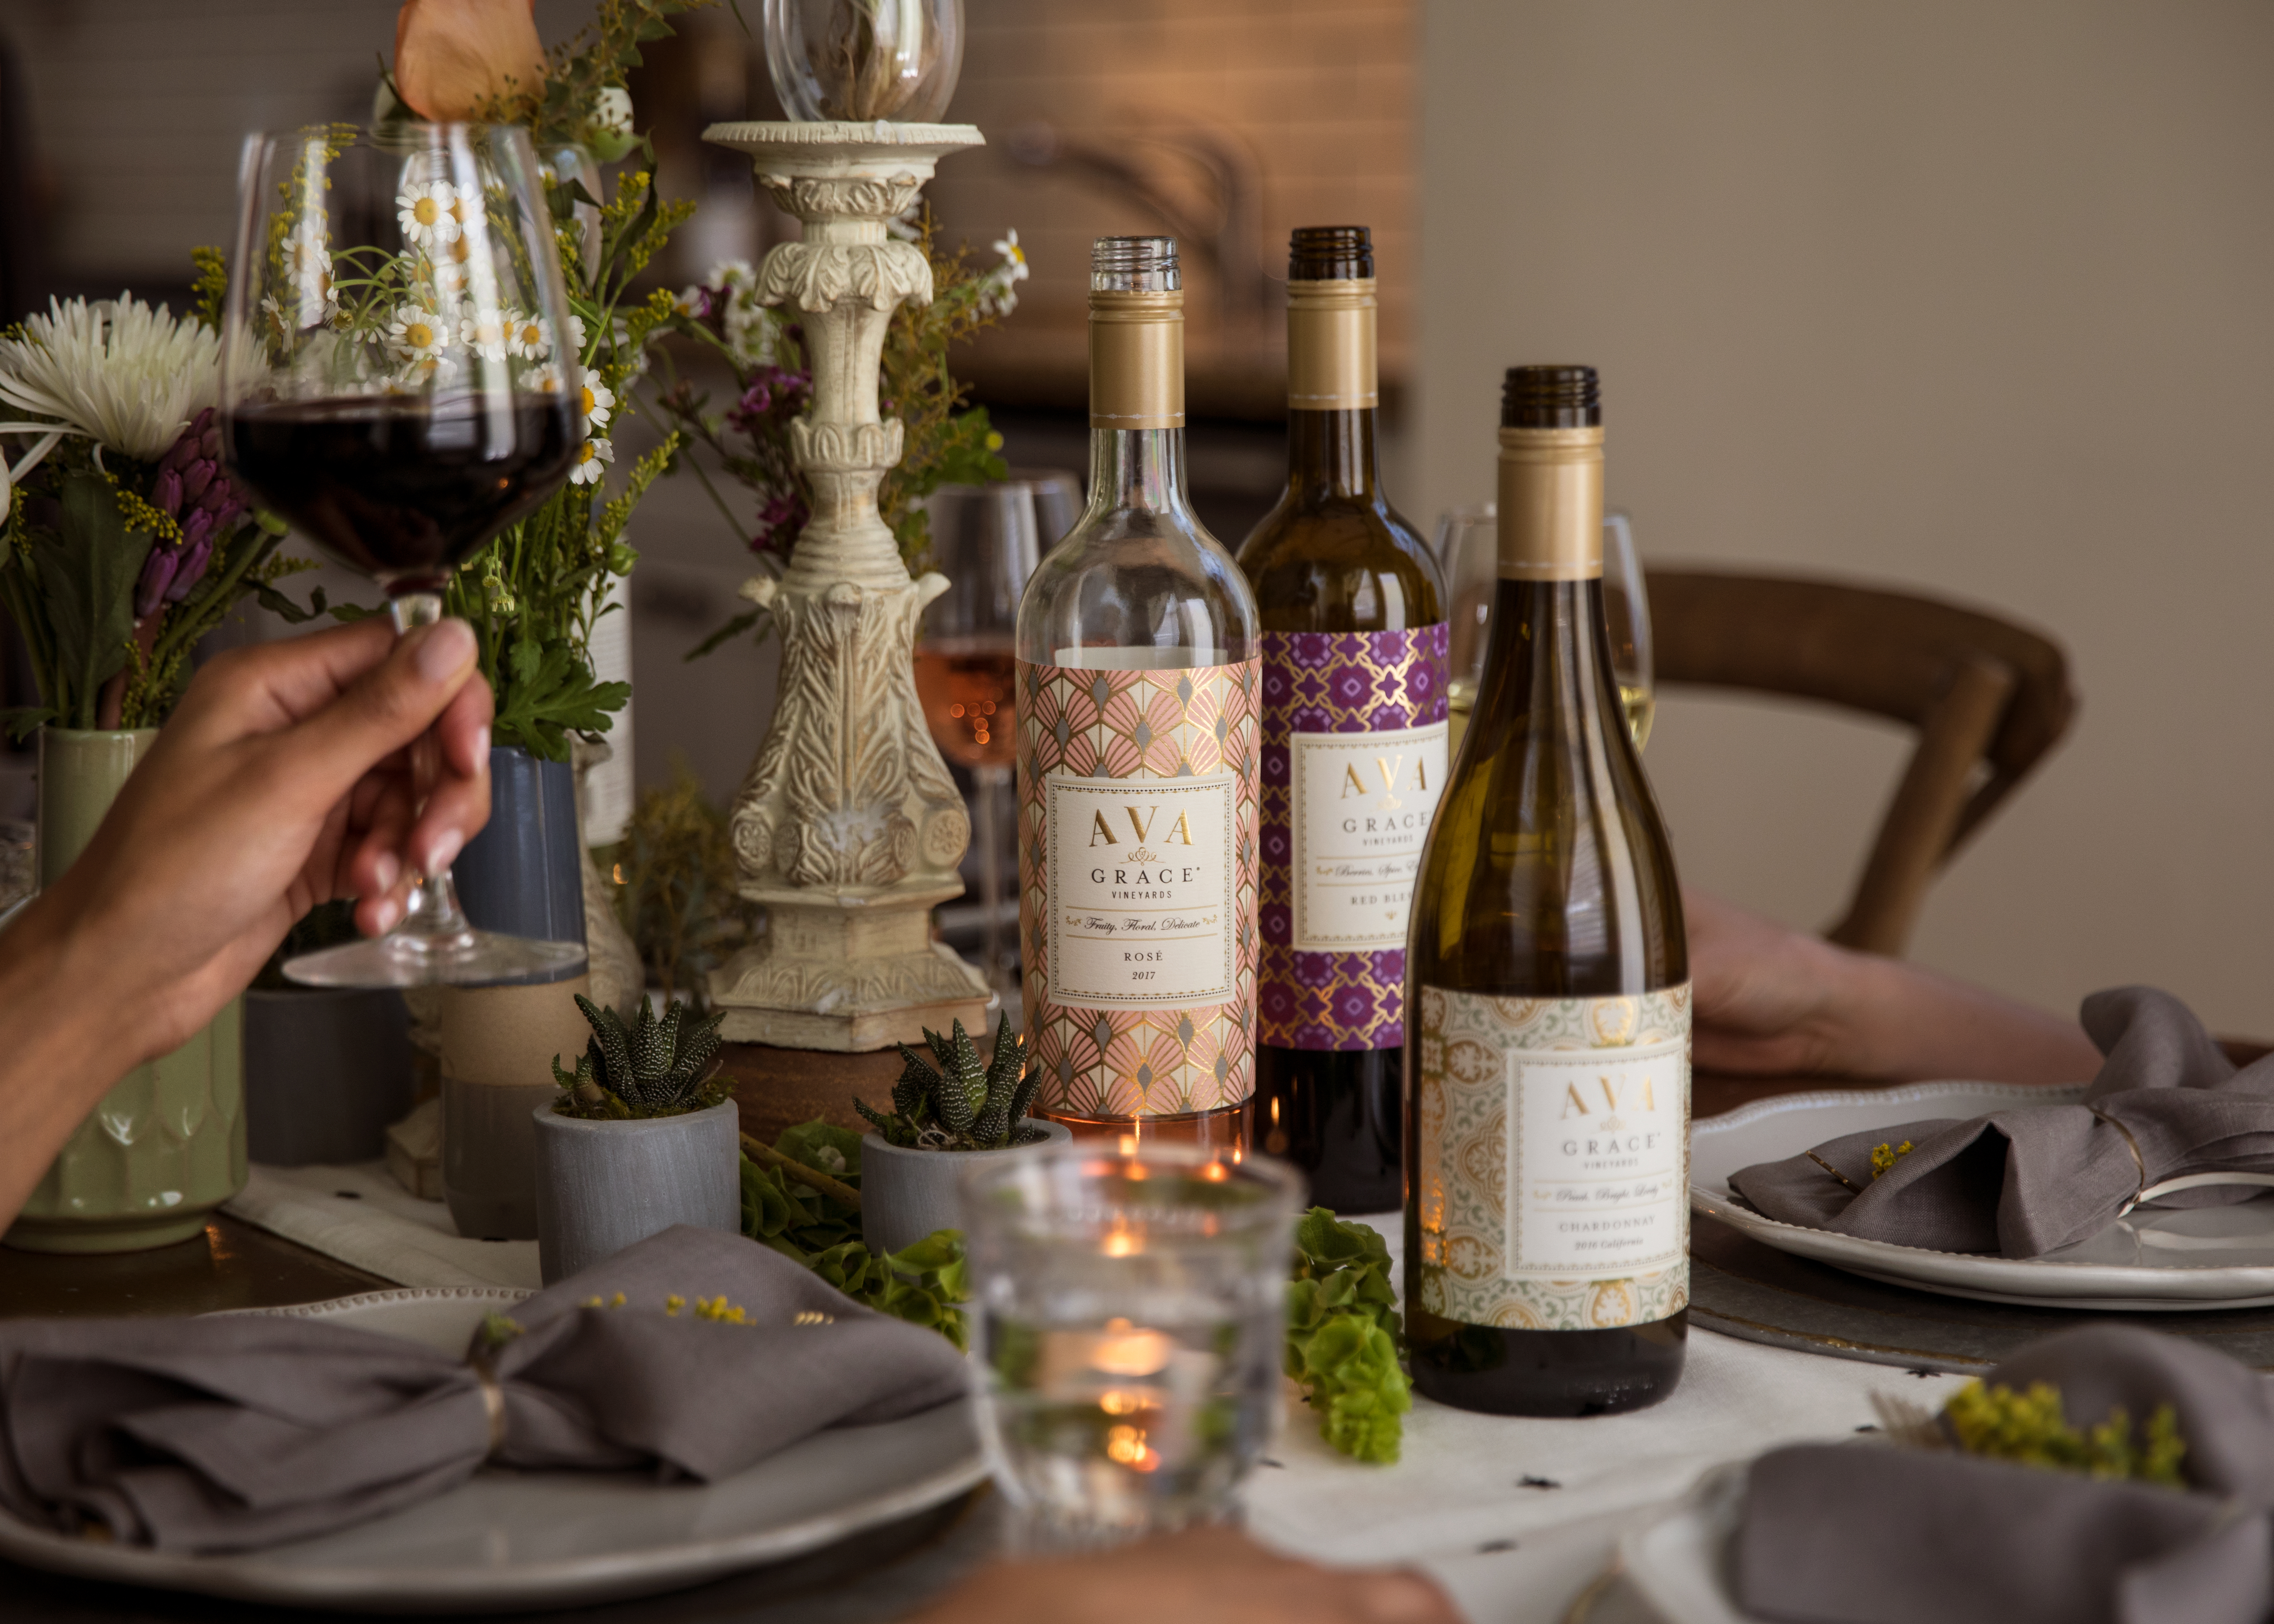 The Best Thanksgiving Food and Wine Pairings from AVA Grace, Wine bottles on a thanksgiving table